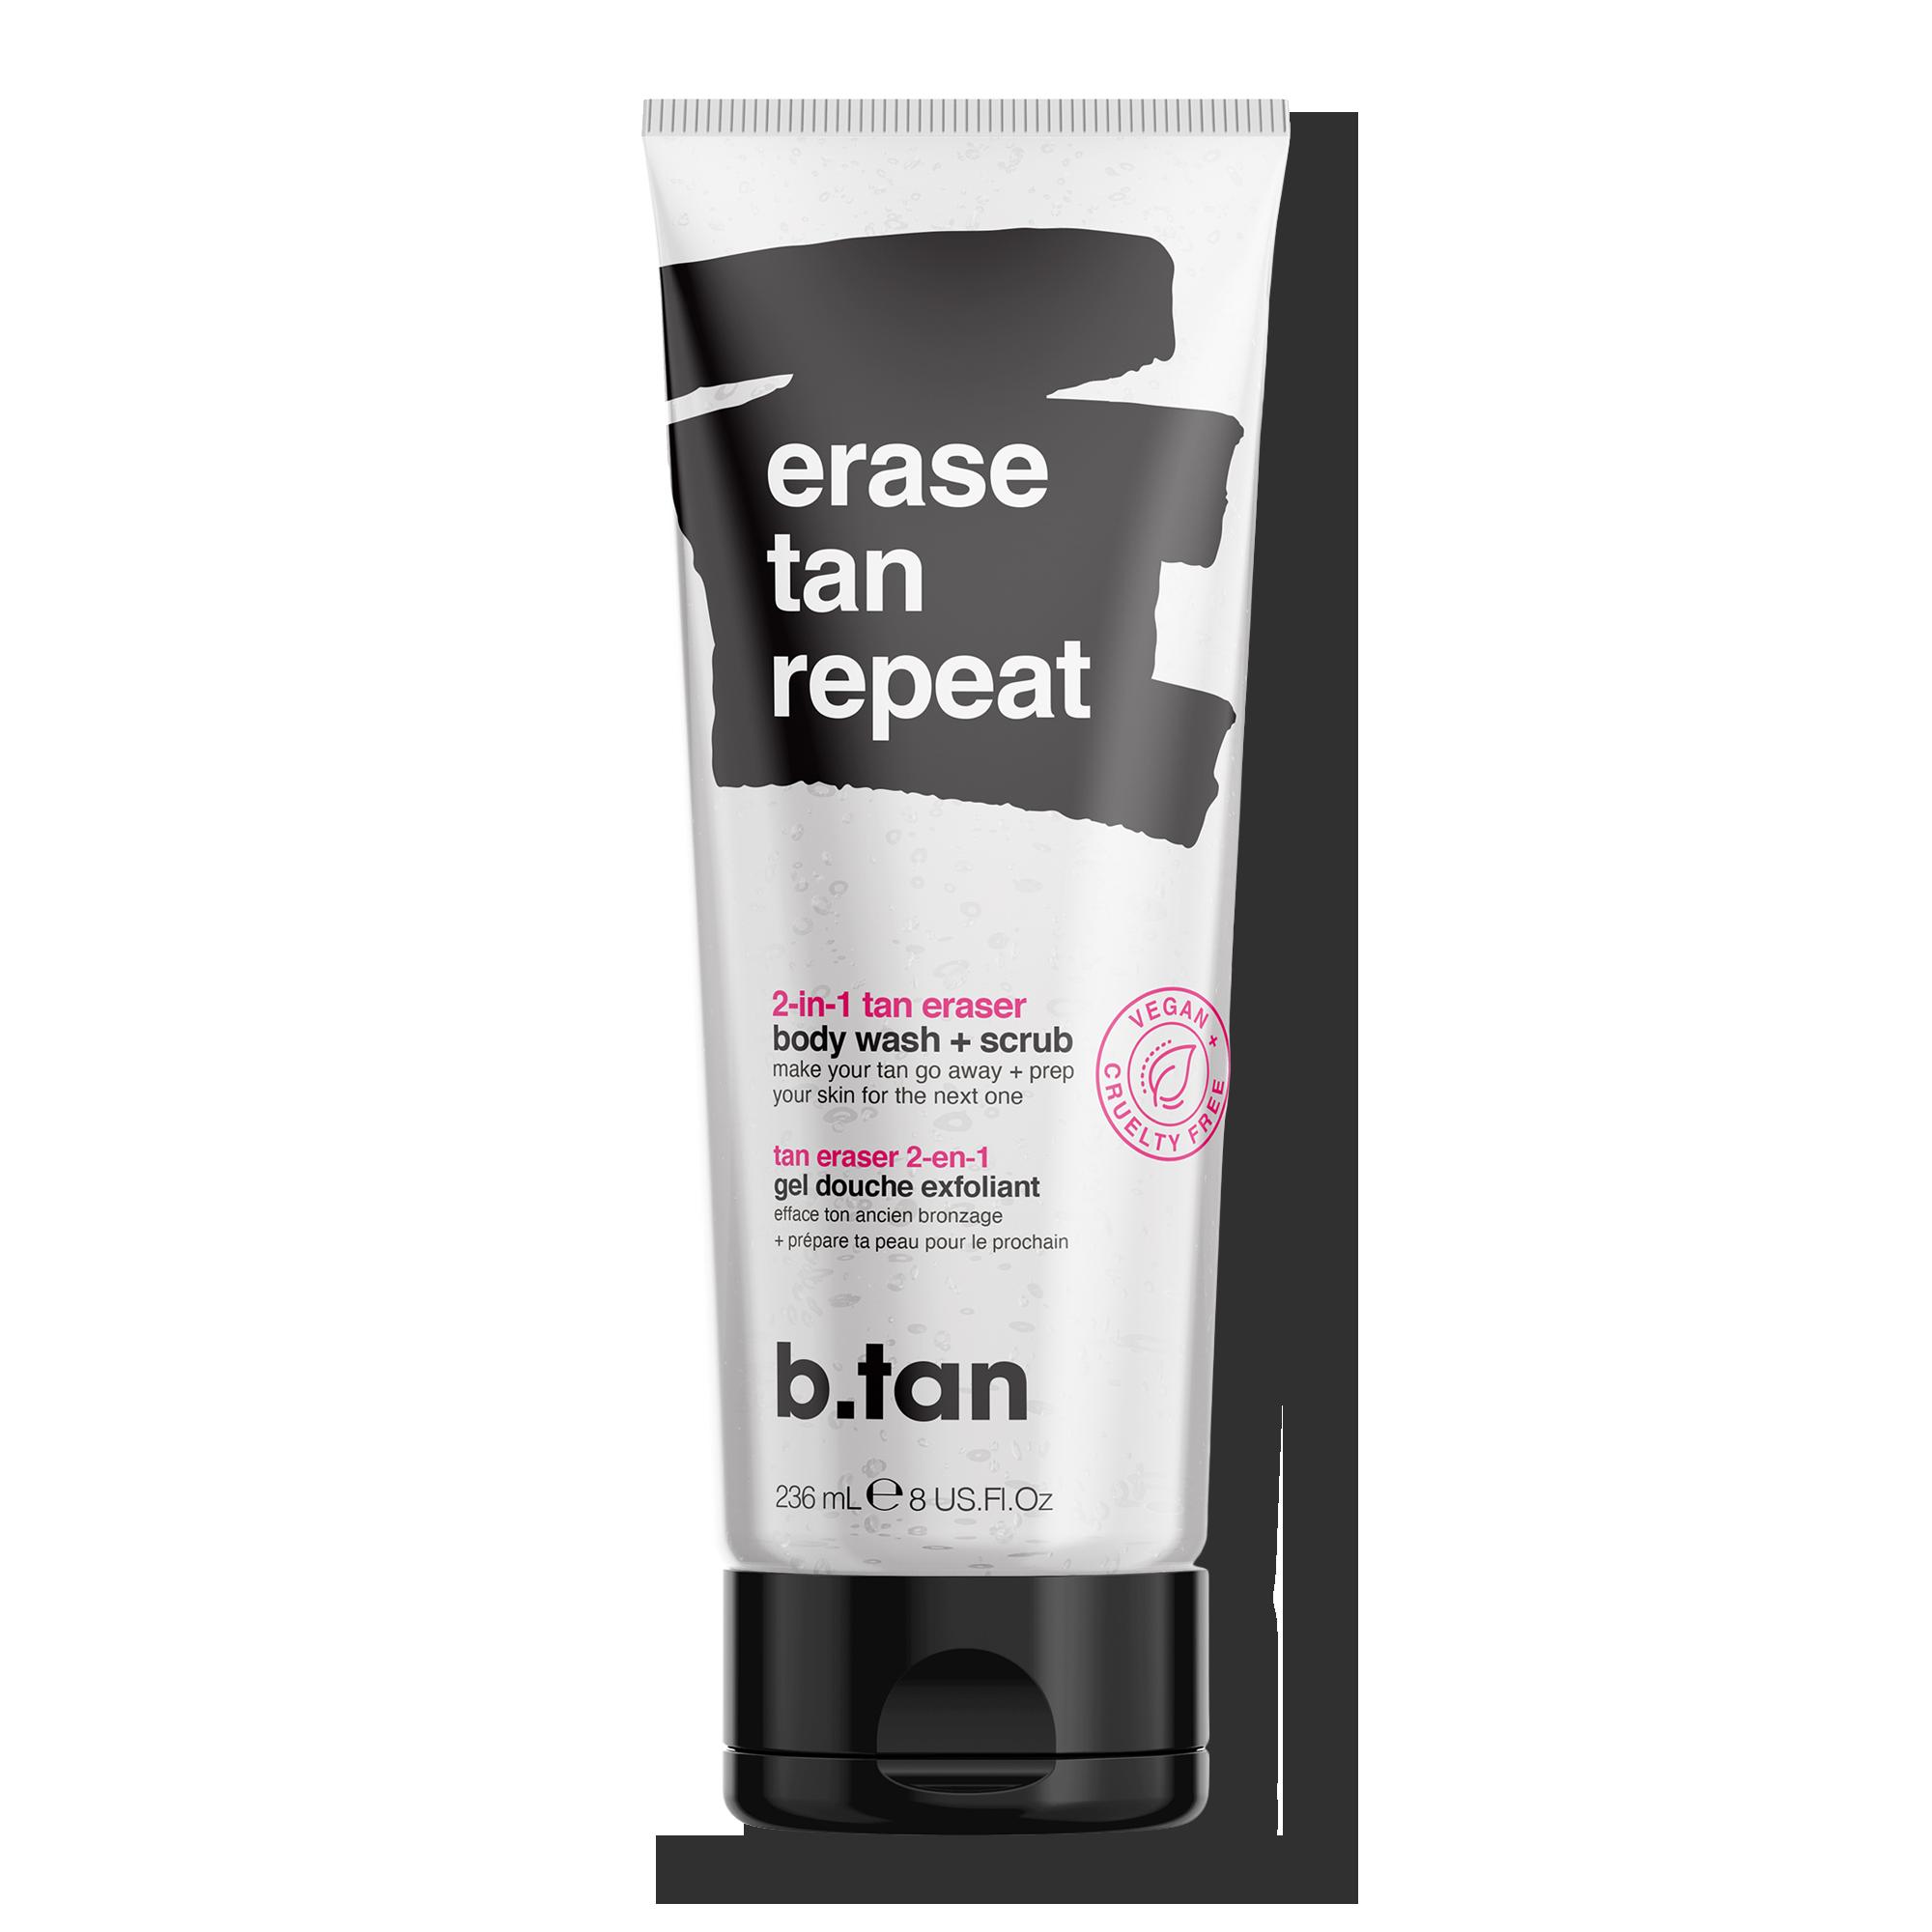 Buy a part of Erase Tan Repeat 2-in-1 Body Wash + Scrub b.tan Outlet Sale  today and get 60% off